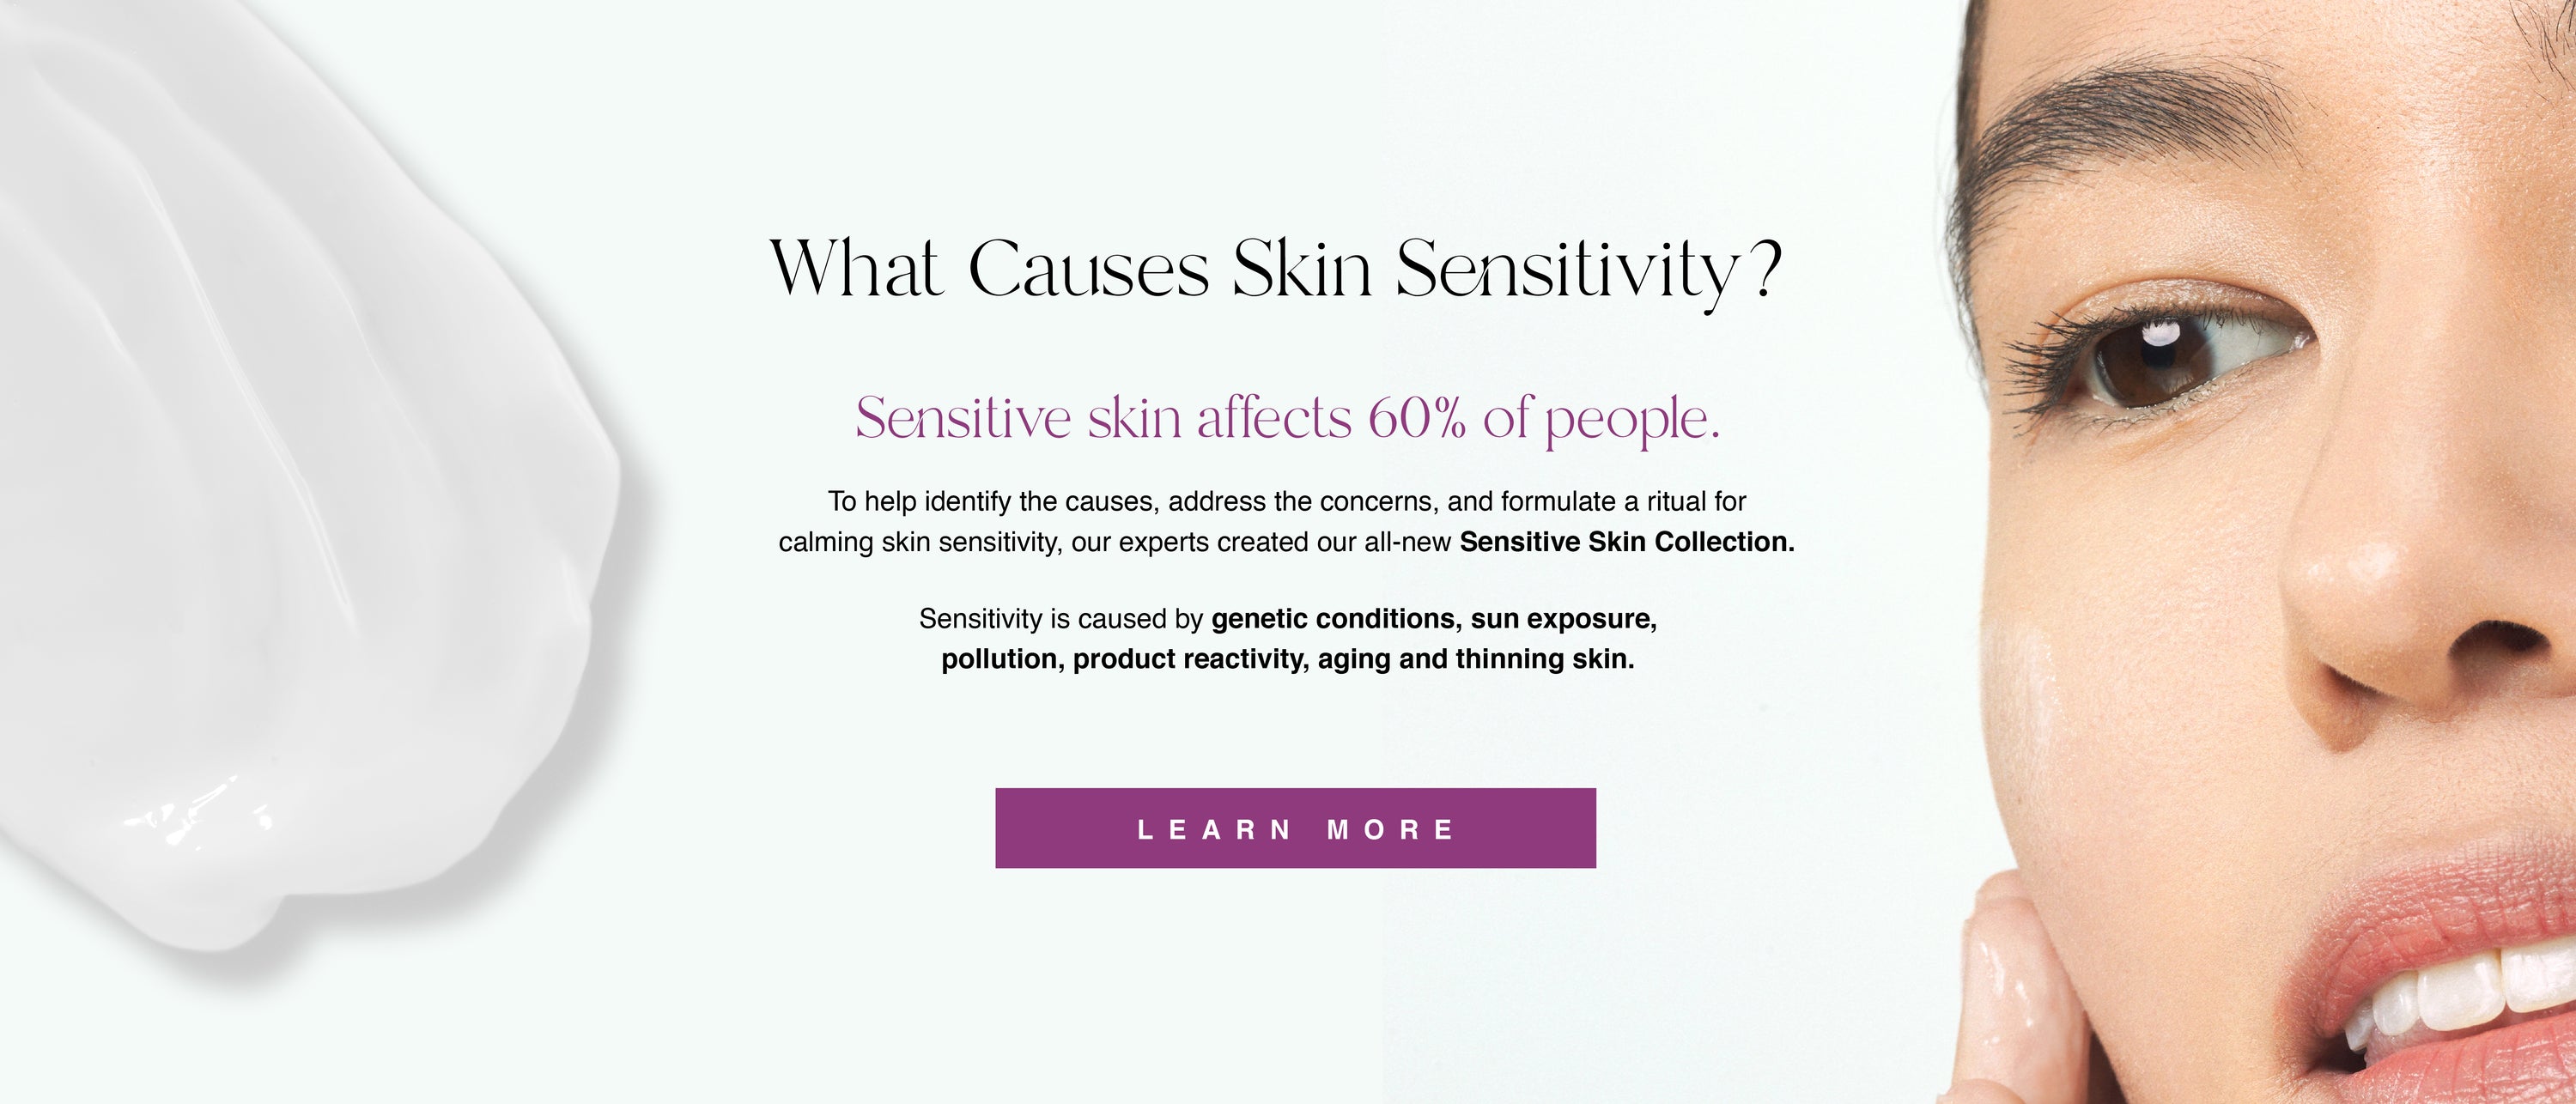 Image of What Causes Skin Sensitivity? Sensitive skin affects 60% of people. To help identify the causes, address the concerns, and formulate a ritual for calming skin sensitivity, our experts created our all-new Sensitive Skin Collection. 